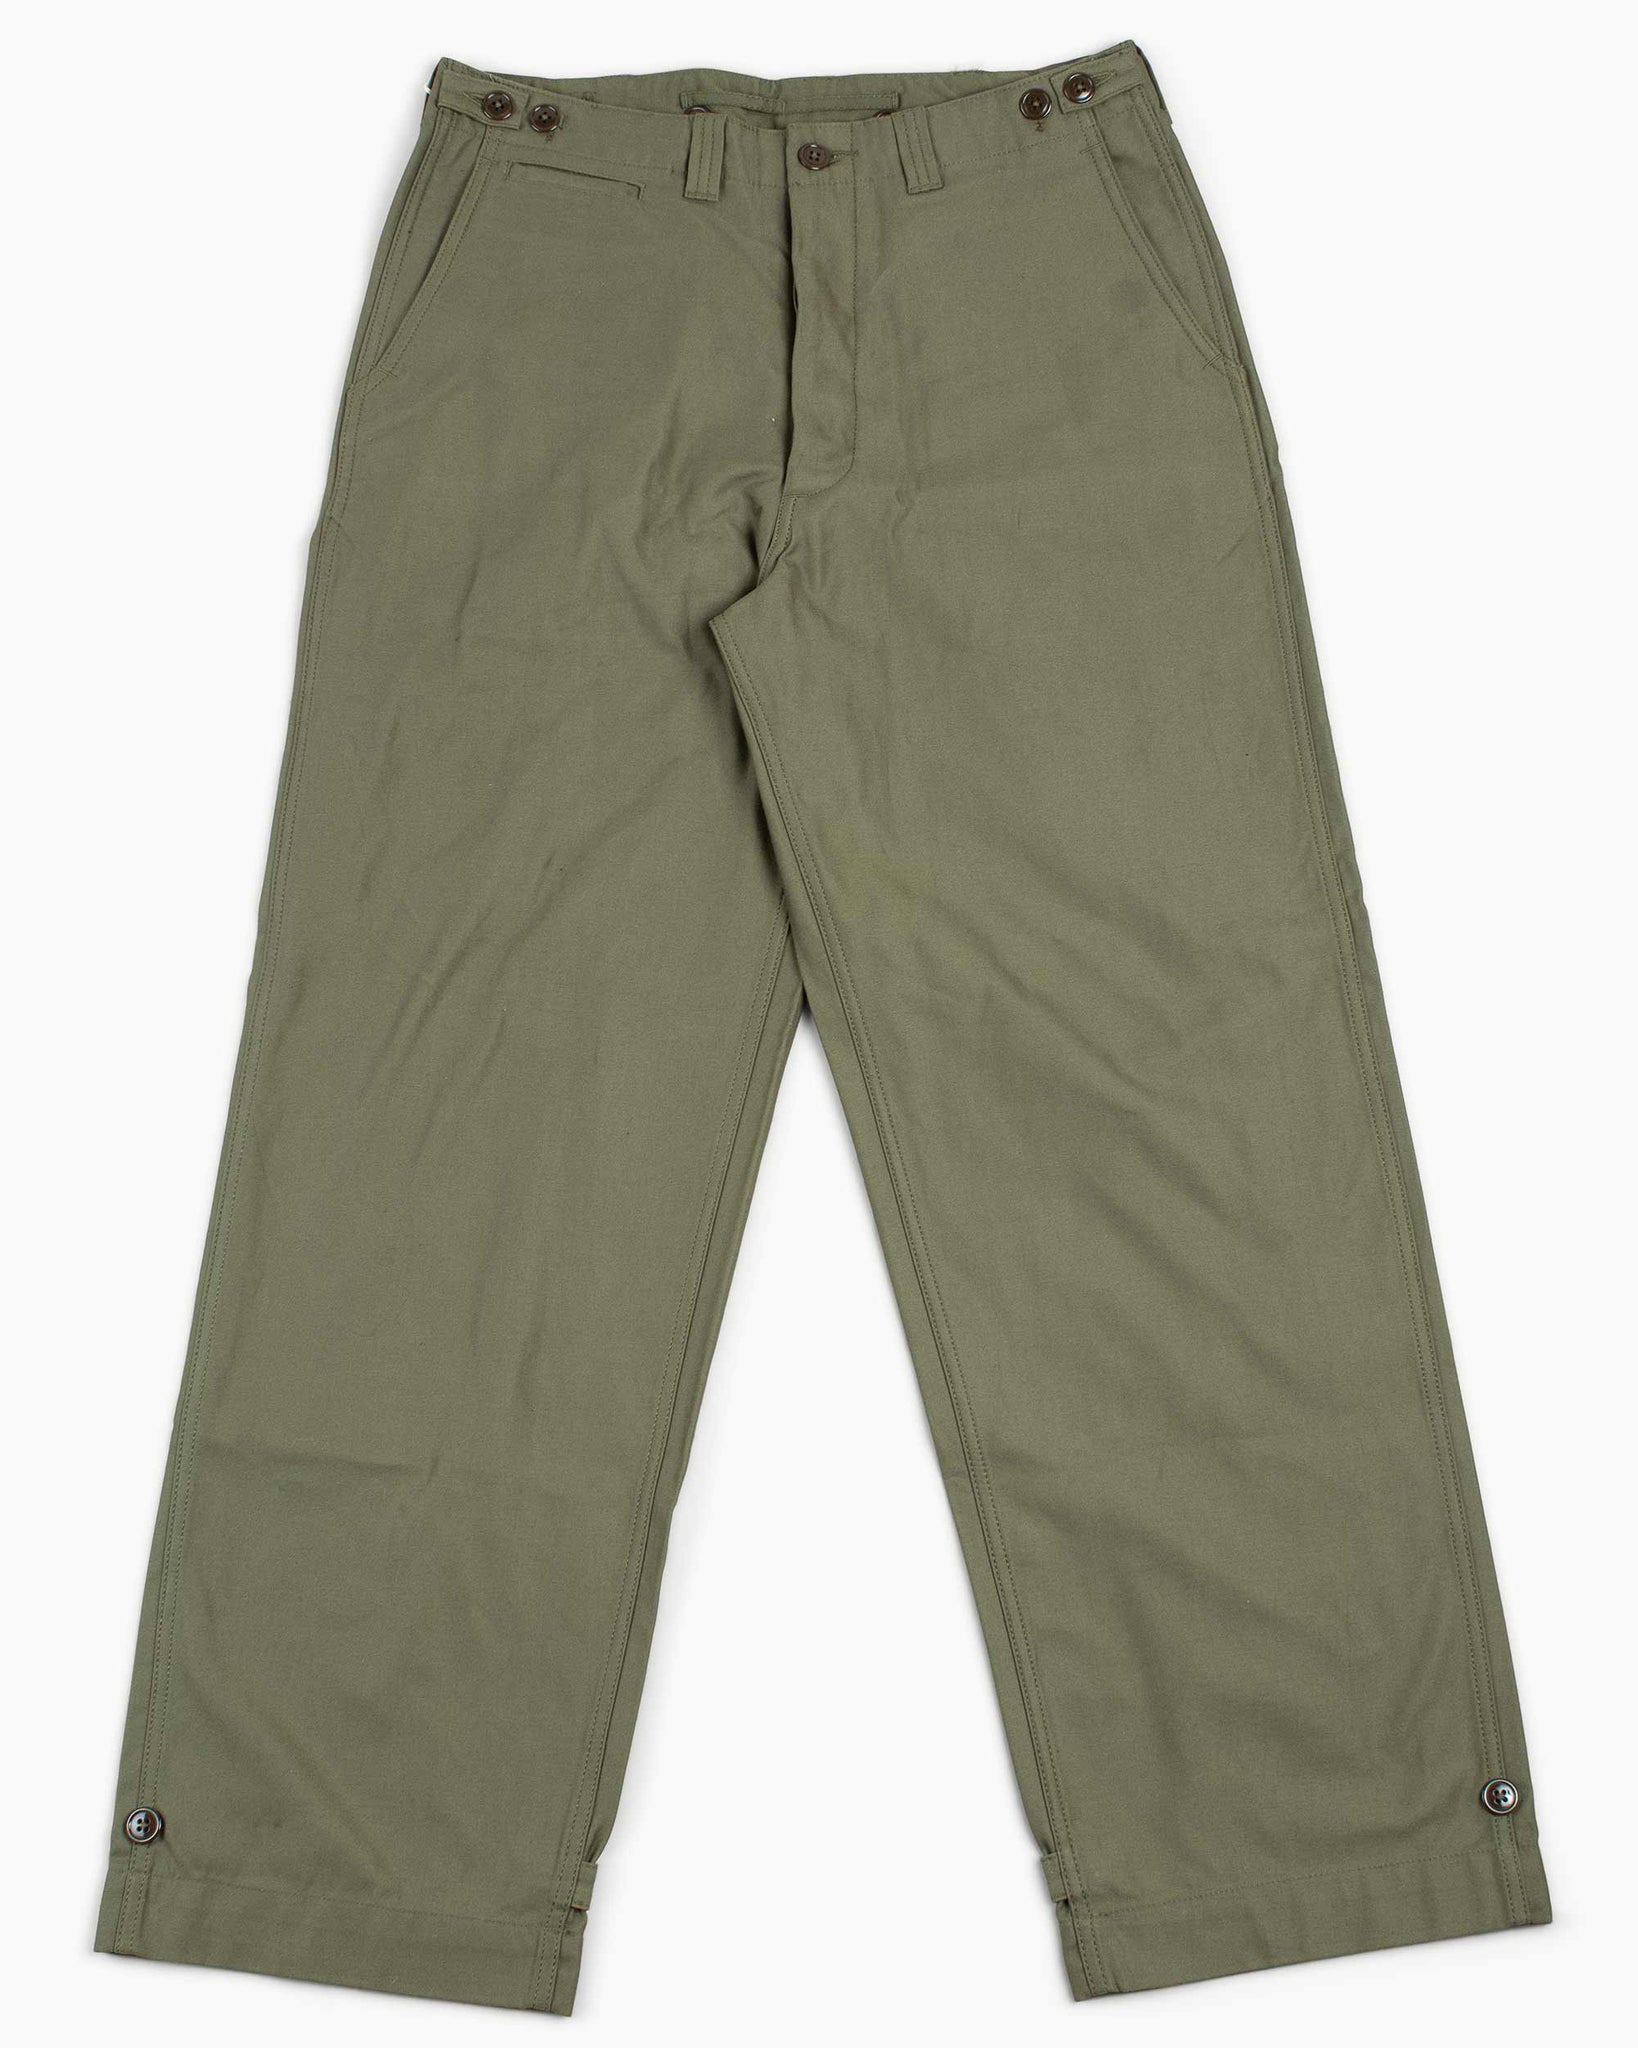 The Real McCoy's MP20103 Trousers, Field, Cotton O.D. Olive